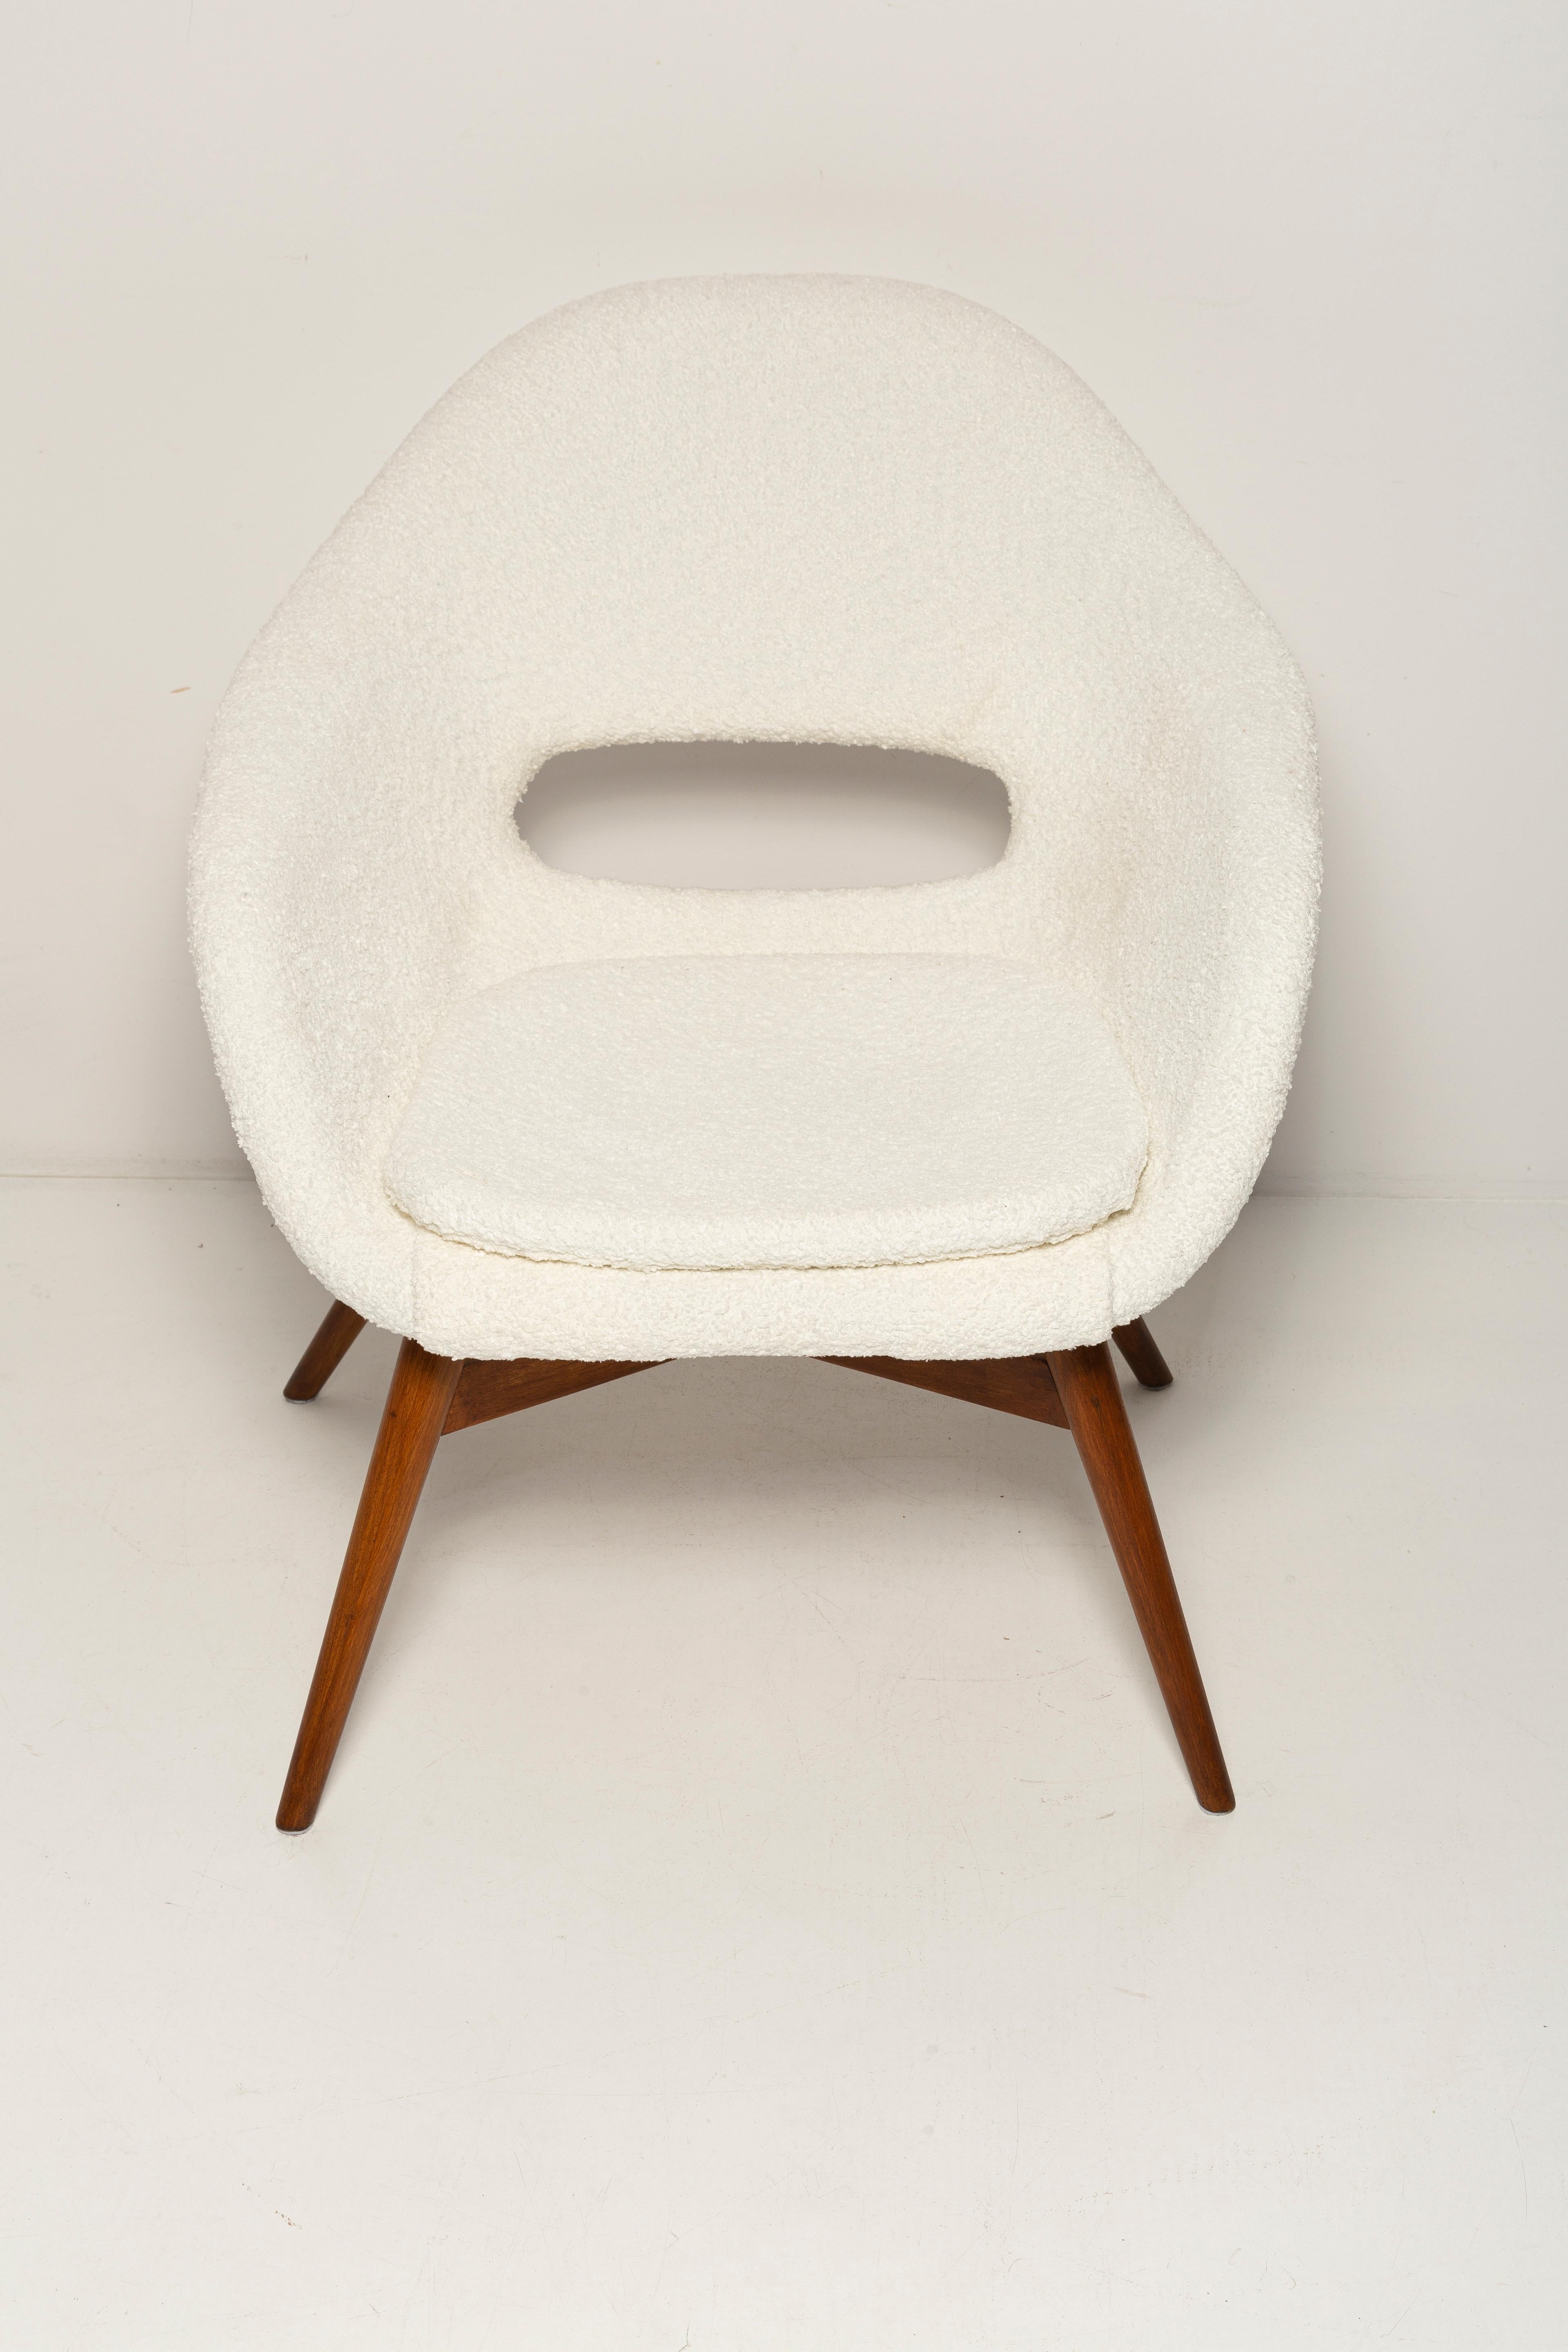 Set of 2 Mid Century White Boucle Shell Chairs, M Navratil, Czechoslovakia, 1960 For Sale 1